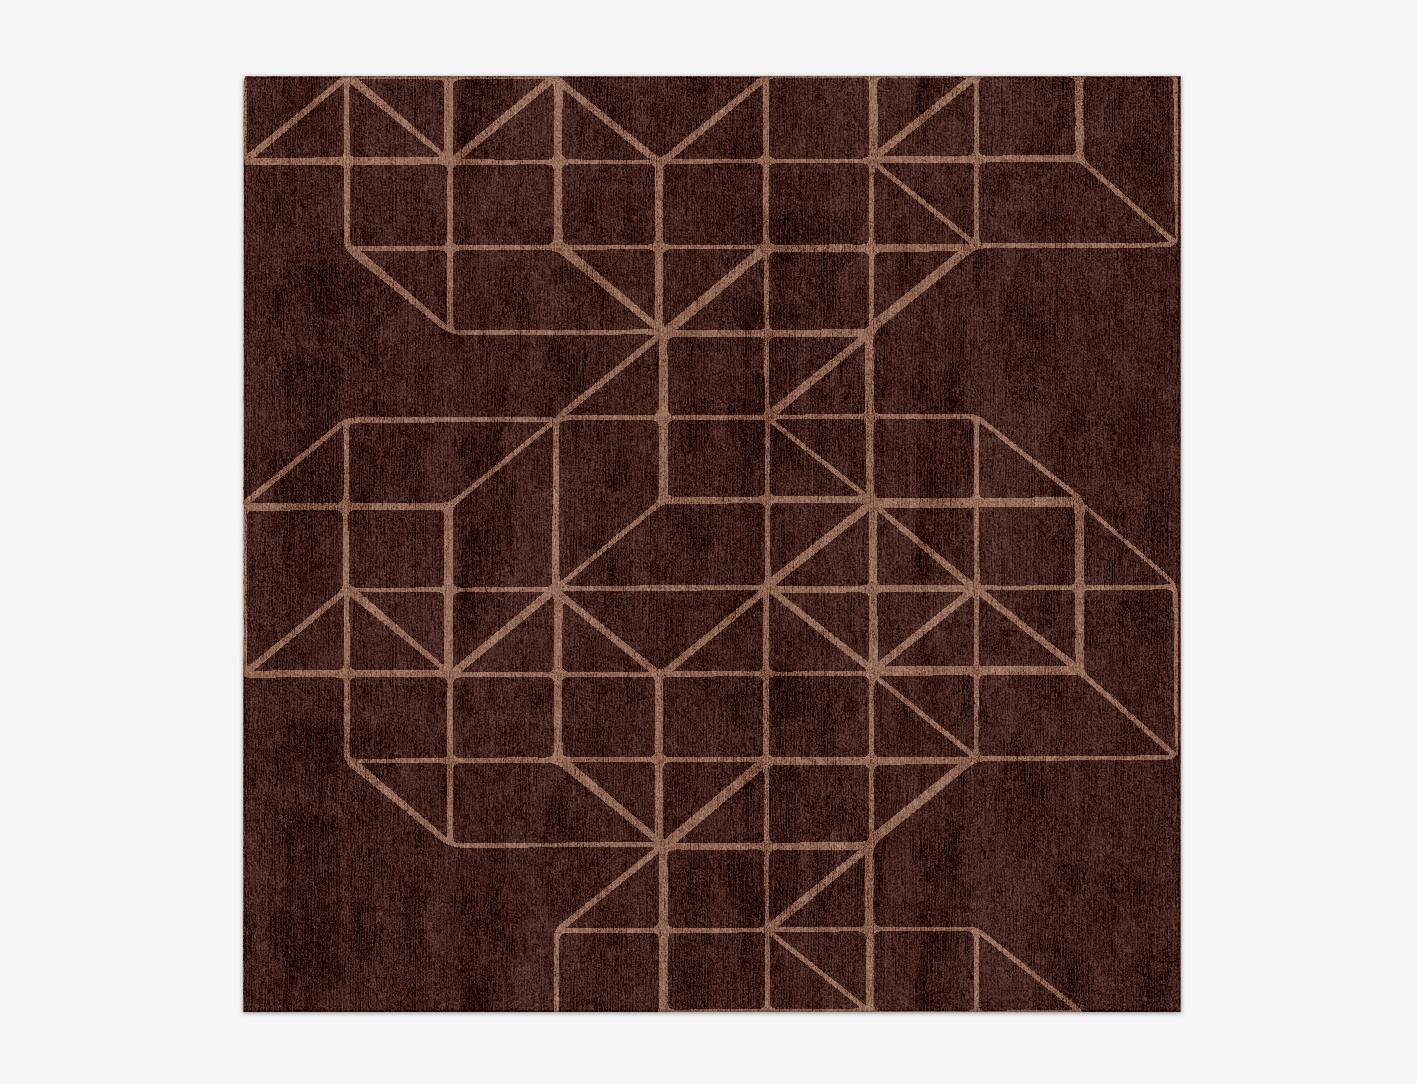 Pack Minimalist Square Hand Knotted Bamboo Silk Custom Rug by Rug Artisan